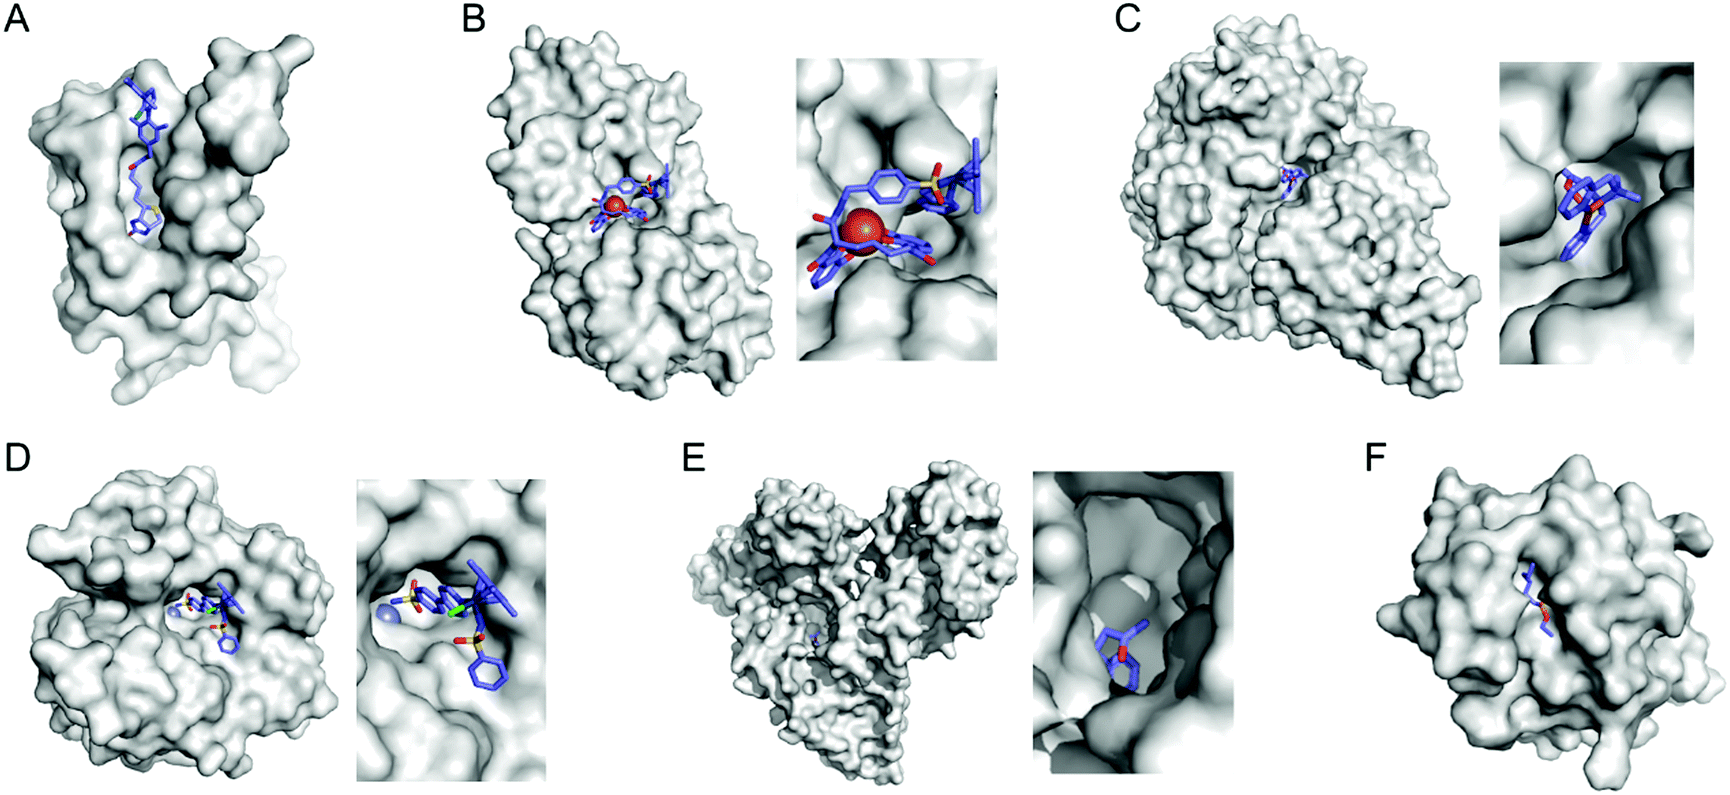 Proteins As Diverse Efficient And Evolvable Scaffolds For Artificial Metalloenzymes Chemical Communications Rsc Publishing - fefe roblox id bypassed